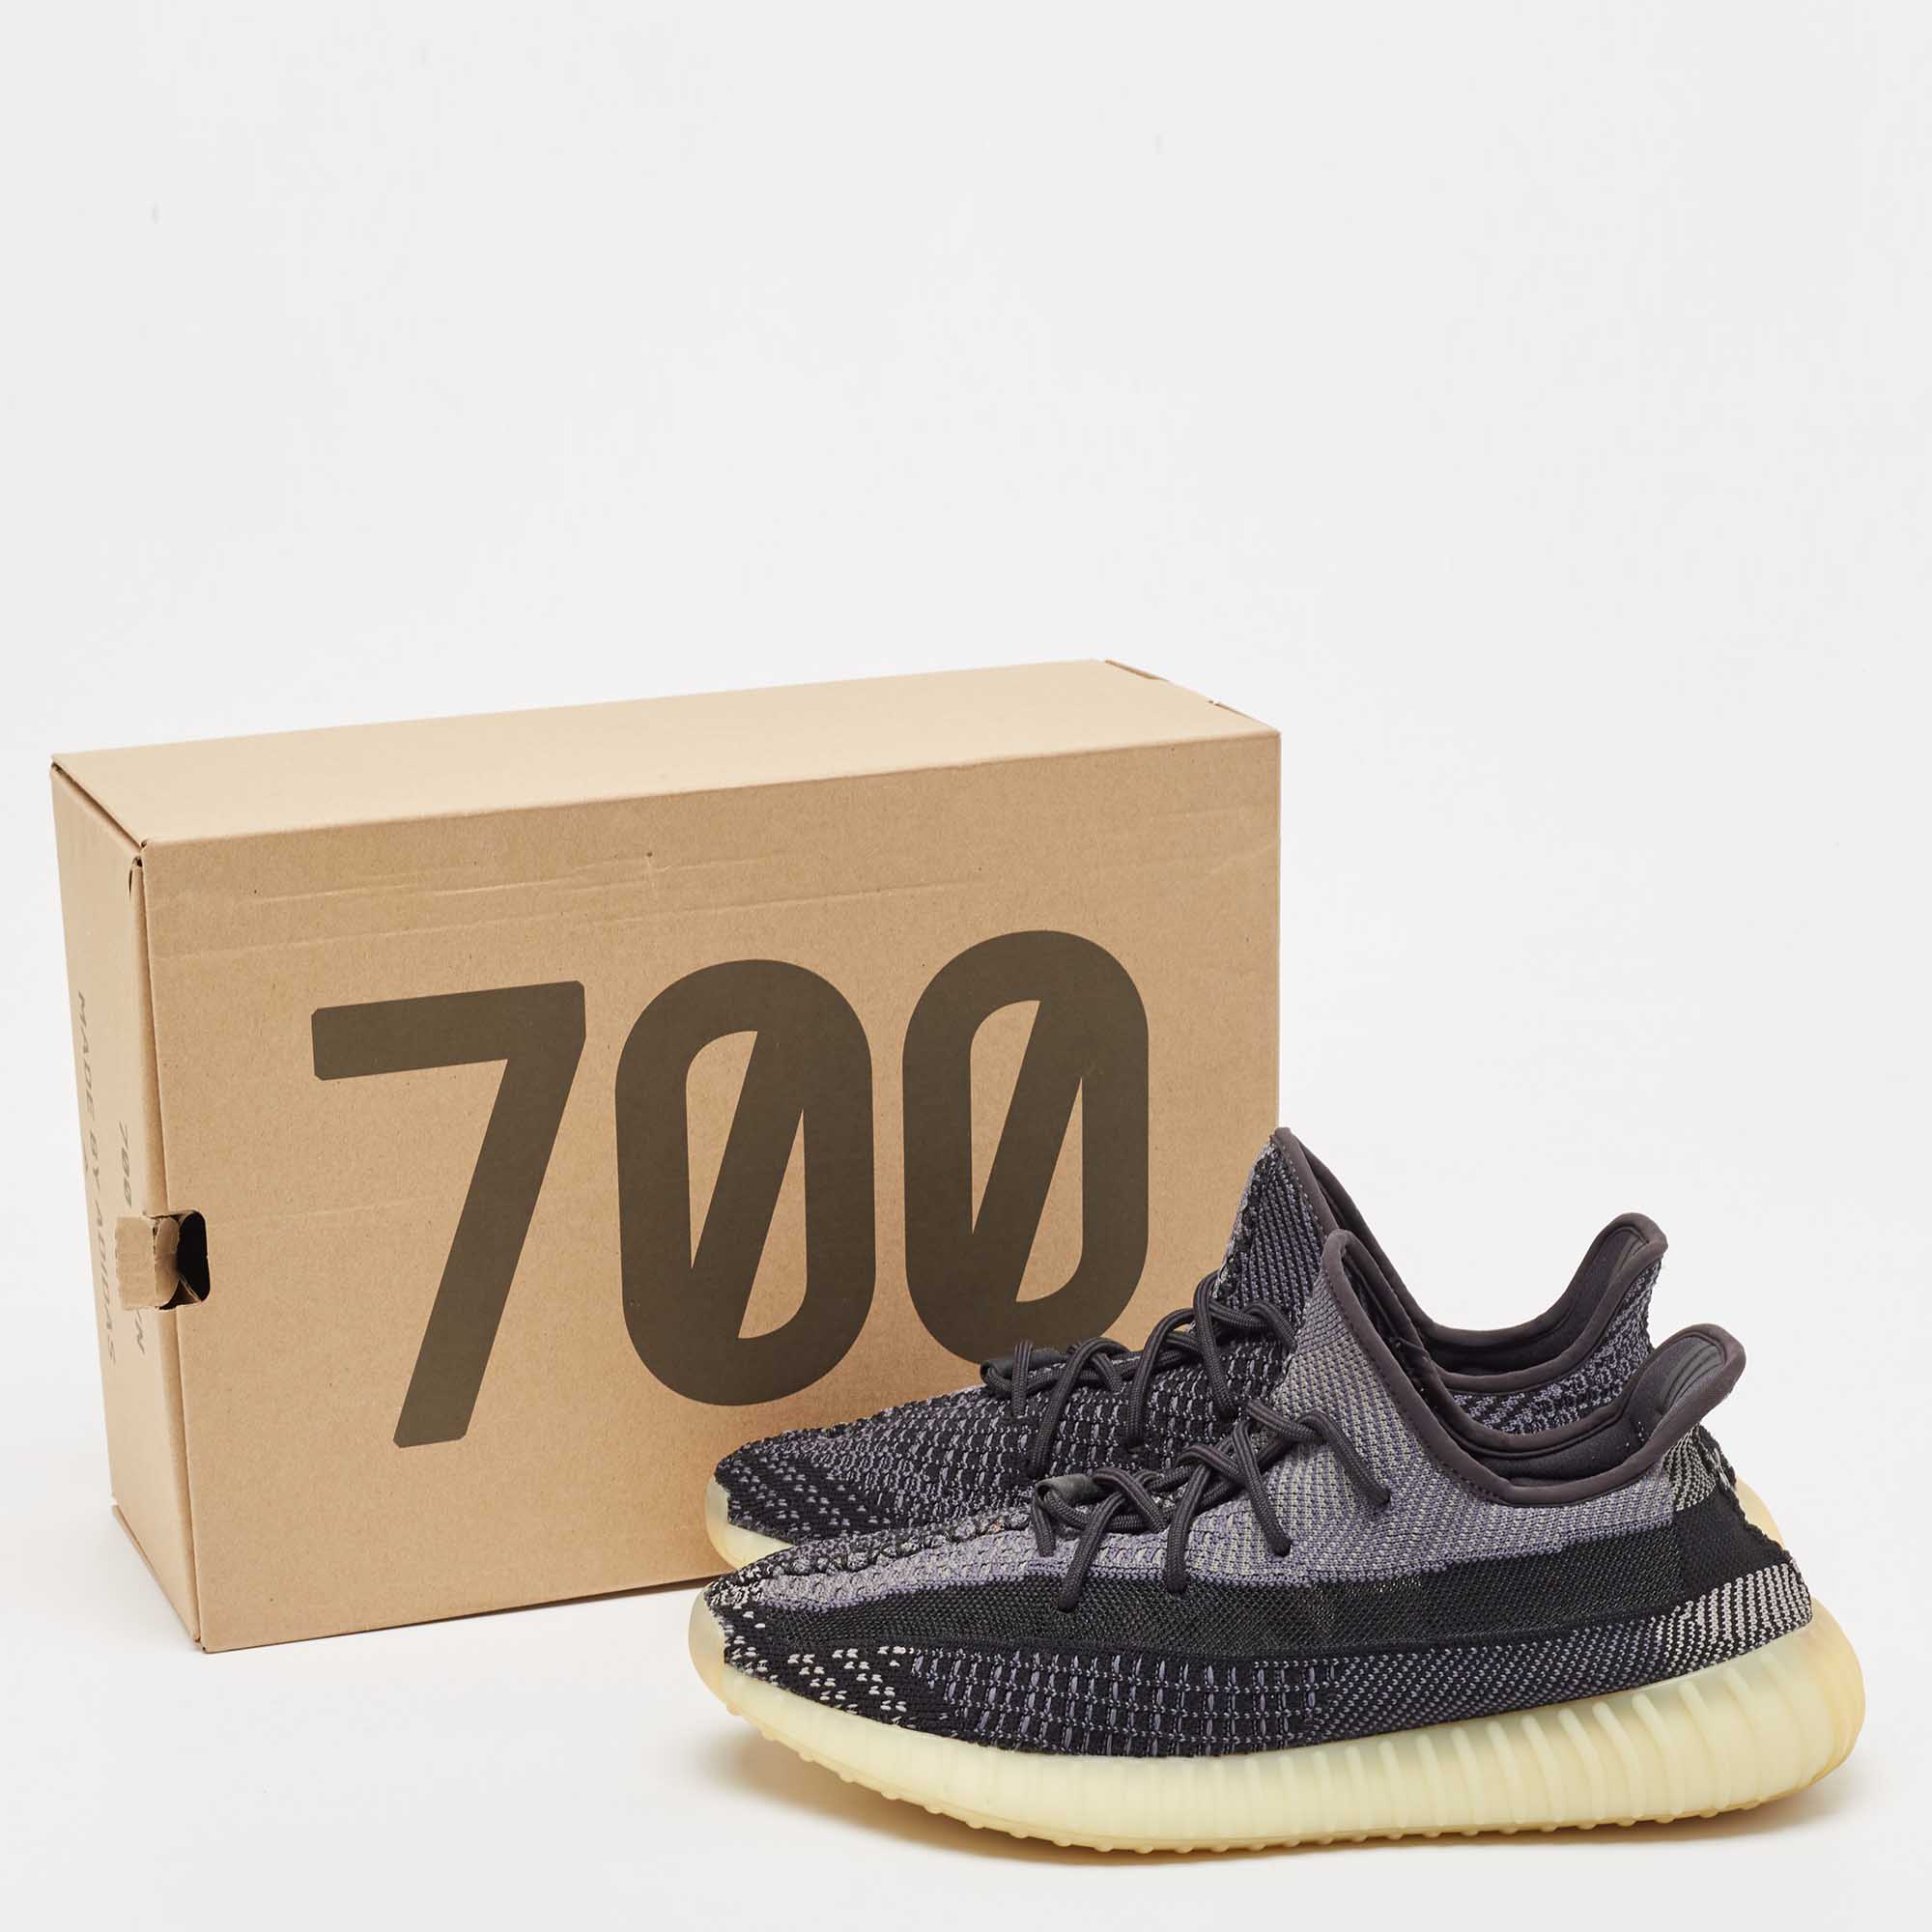 Yeezy X Adidas Black Knit Fabric Boost 350 V2 Carbon Sneakers Size 47 1/3